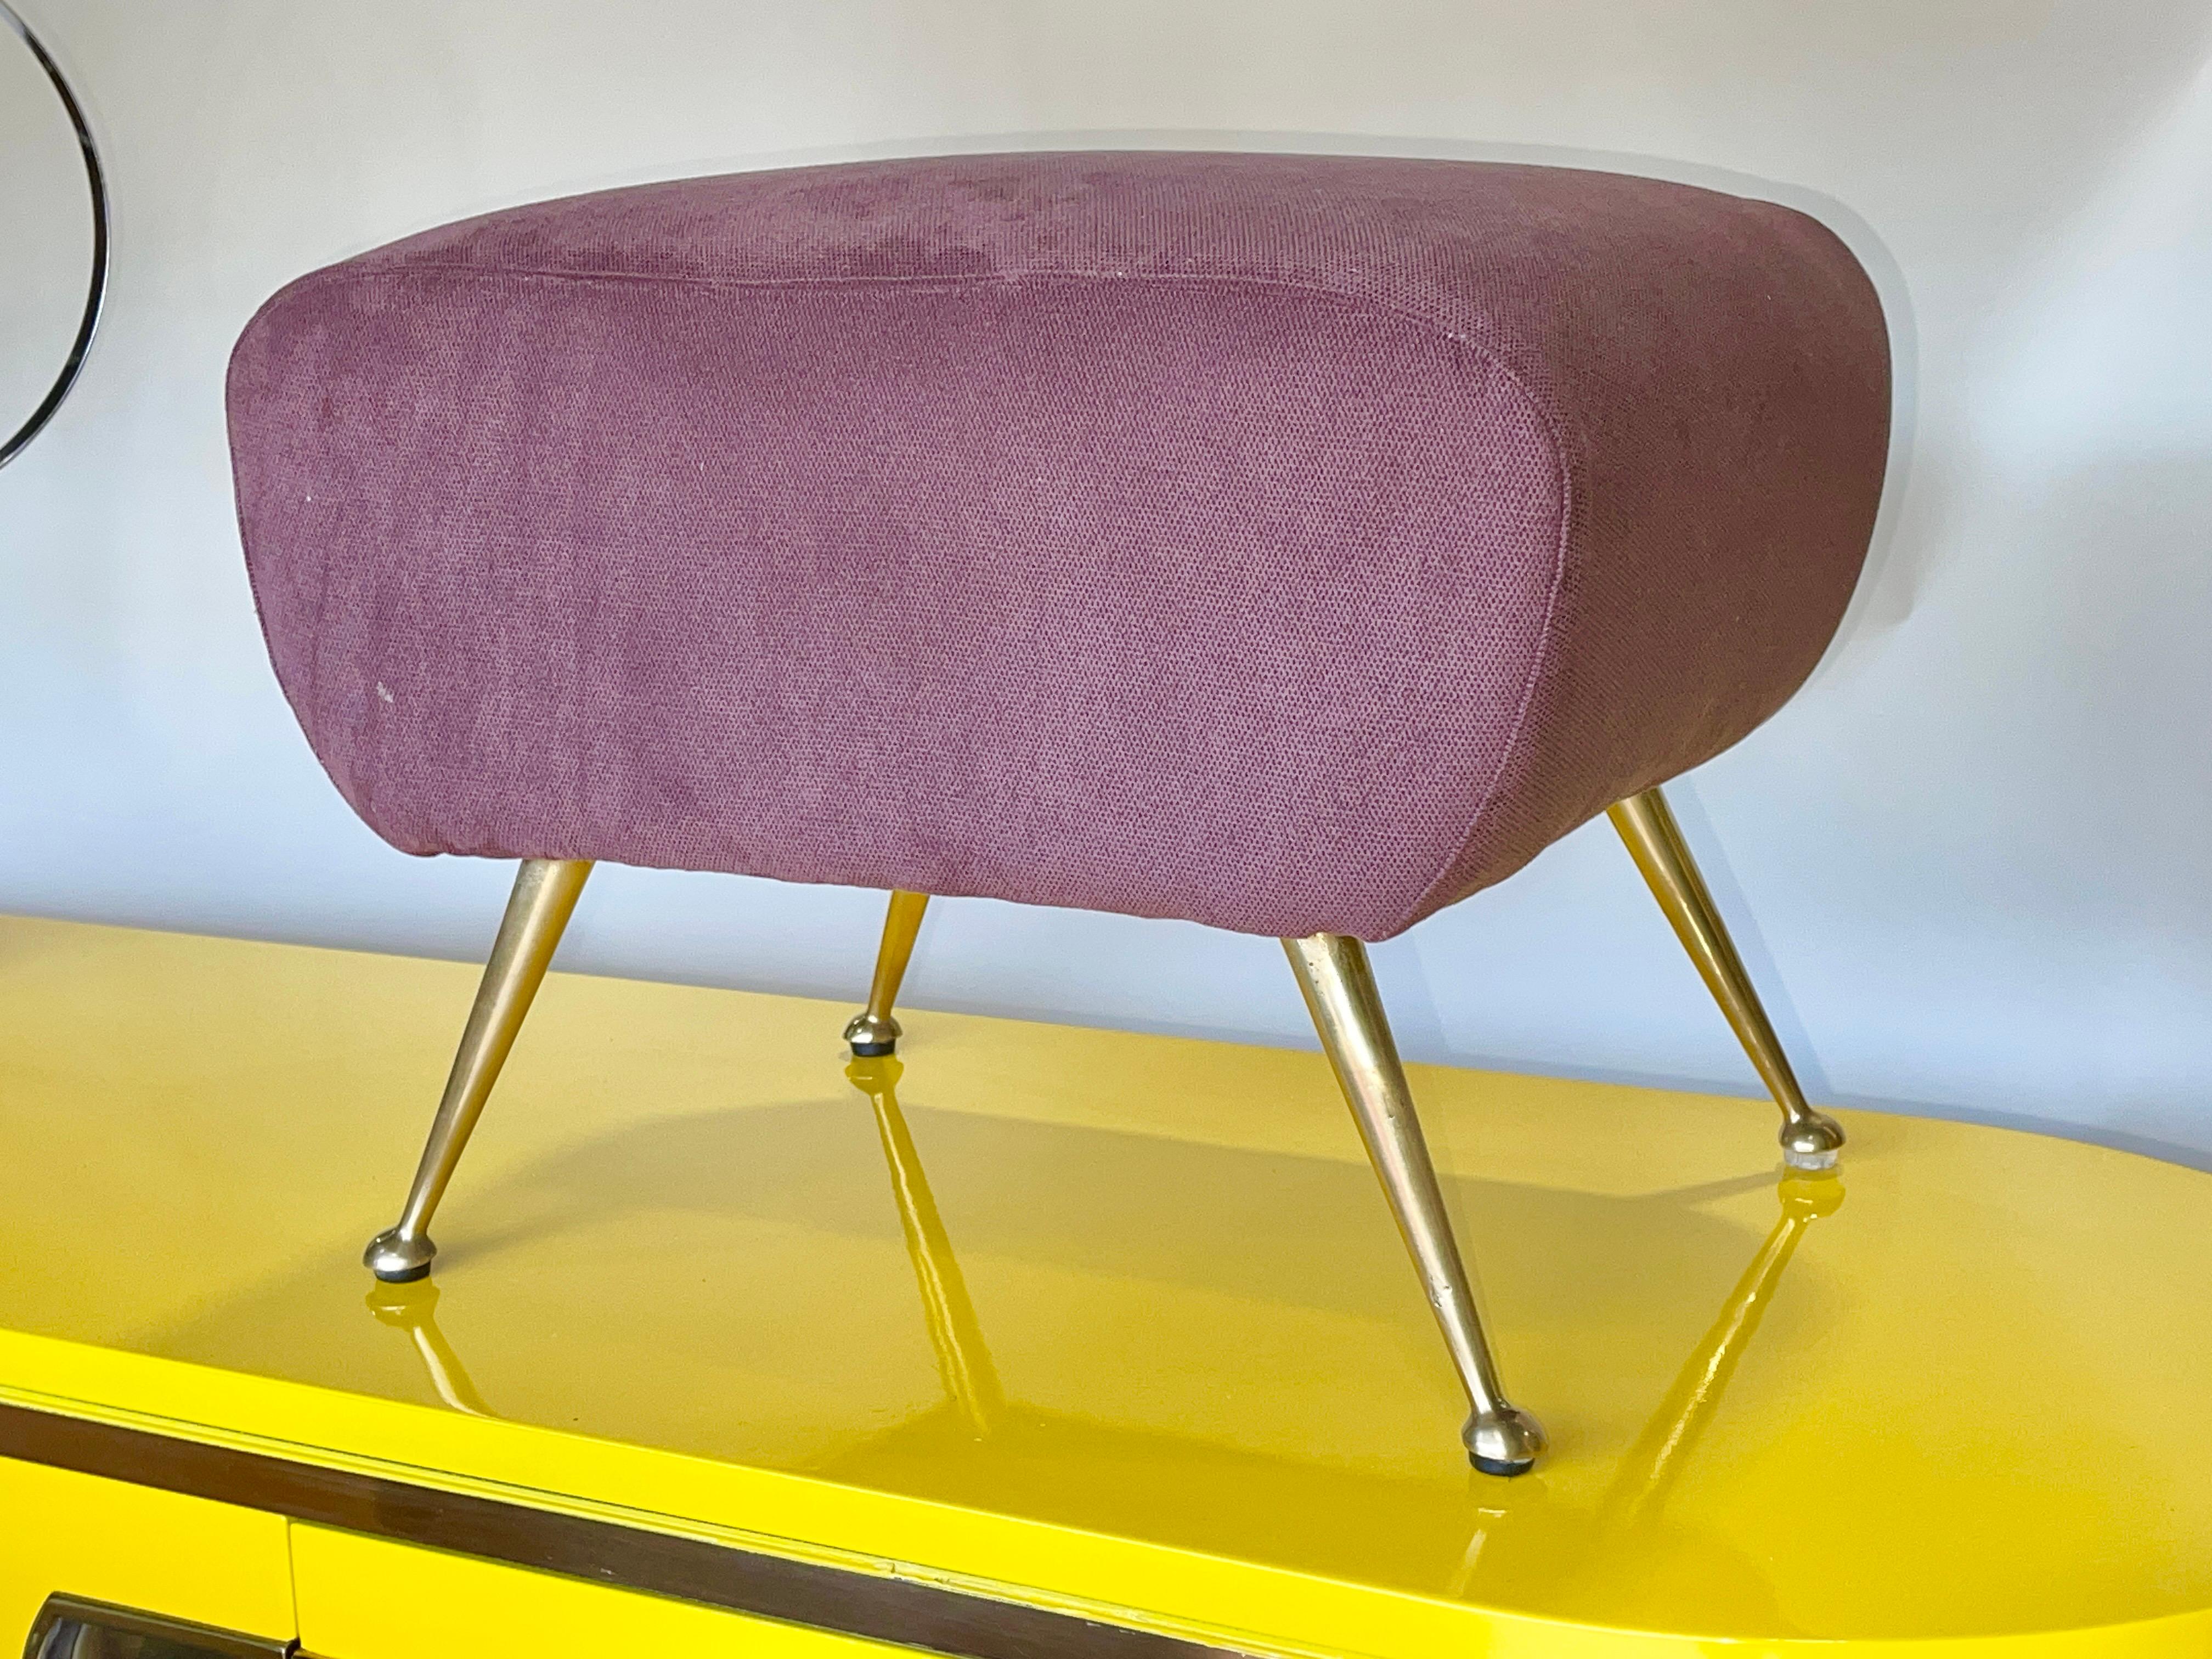 Footstool or ottoman, Italian 1950s, in rectangular slightly kidney bean shape. Wood frame upholstered in dense foam and covered in its original wine colored cotton velvet, standing on four tapered solid brass legs with half-ball feet and rubber